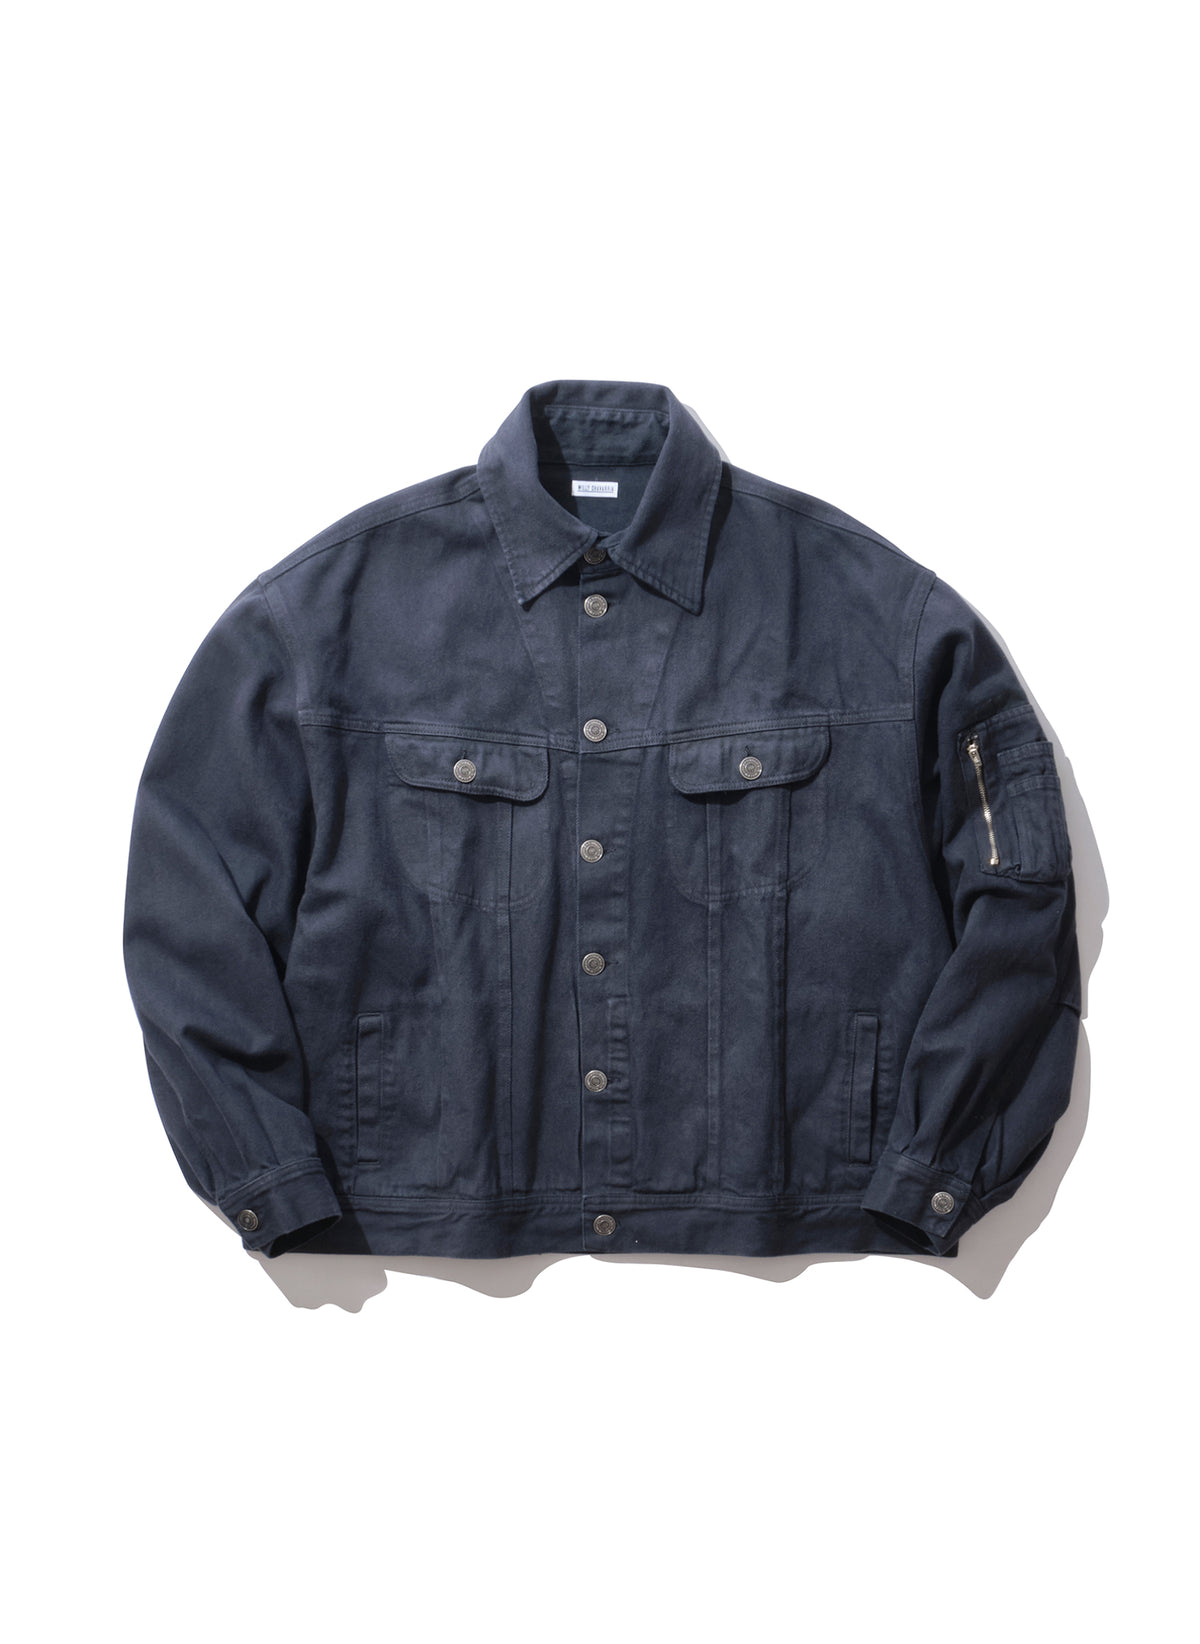 <span style="color: #f50b0b;">Last One</span>【RESTOCK】 WILLY CHAVARRIA / CHACHI TRUCKER CIGARETTE POCKET JACKET CHEMICAL WASH BLACK